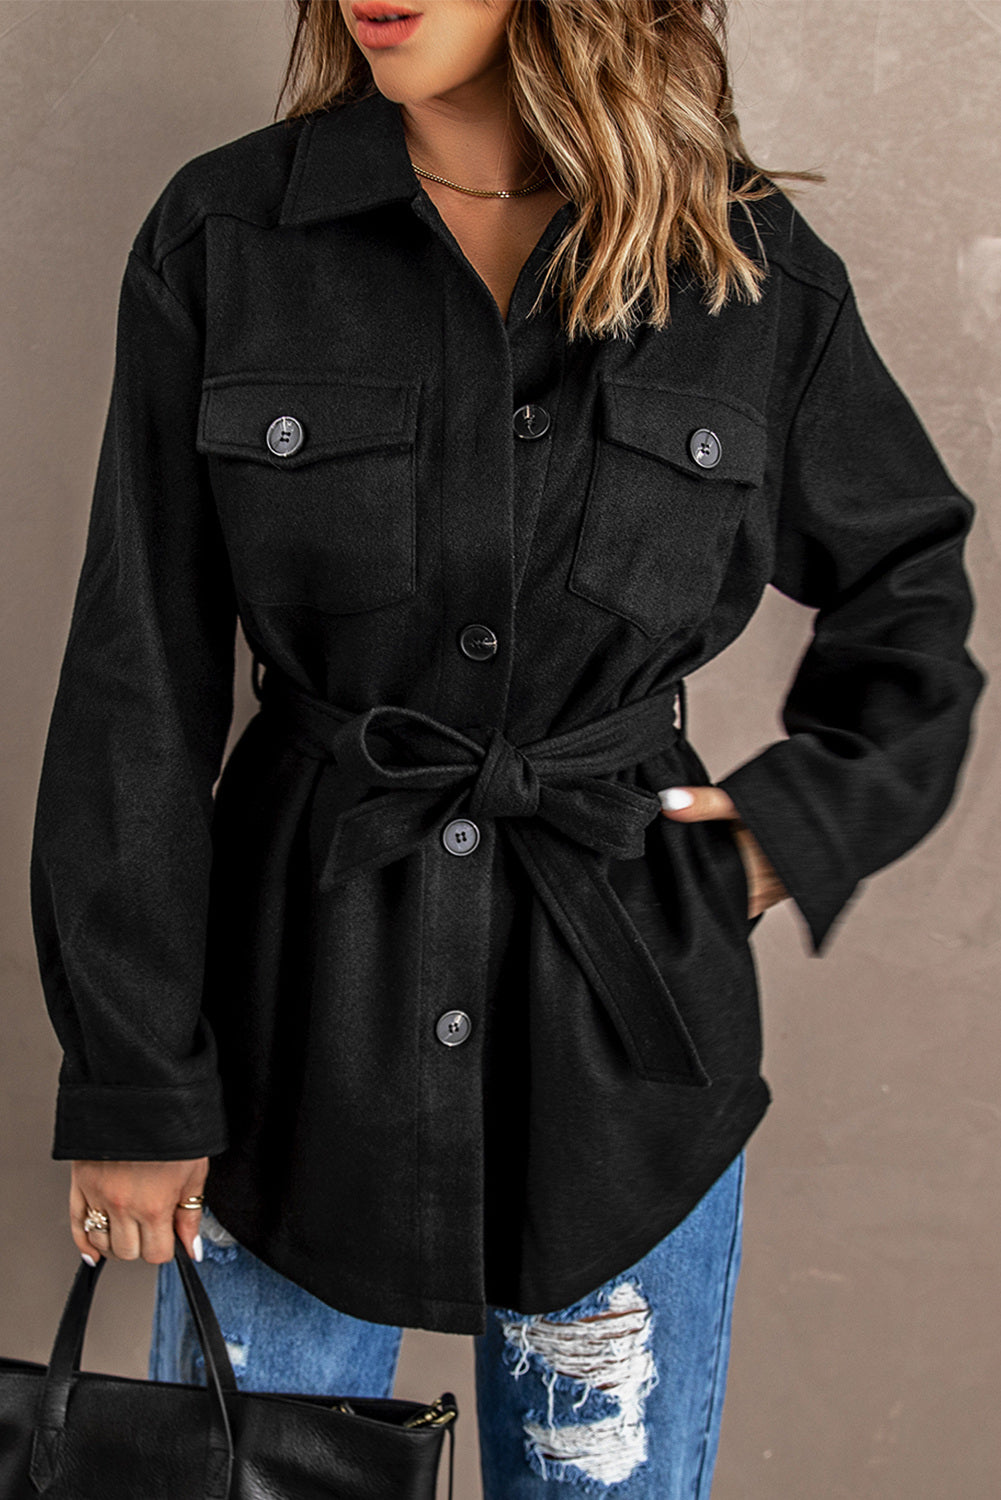 Black Women's Lapel Button Down Coat Winter Belted Coat with Pockets LC8511359-2